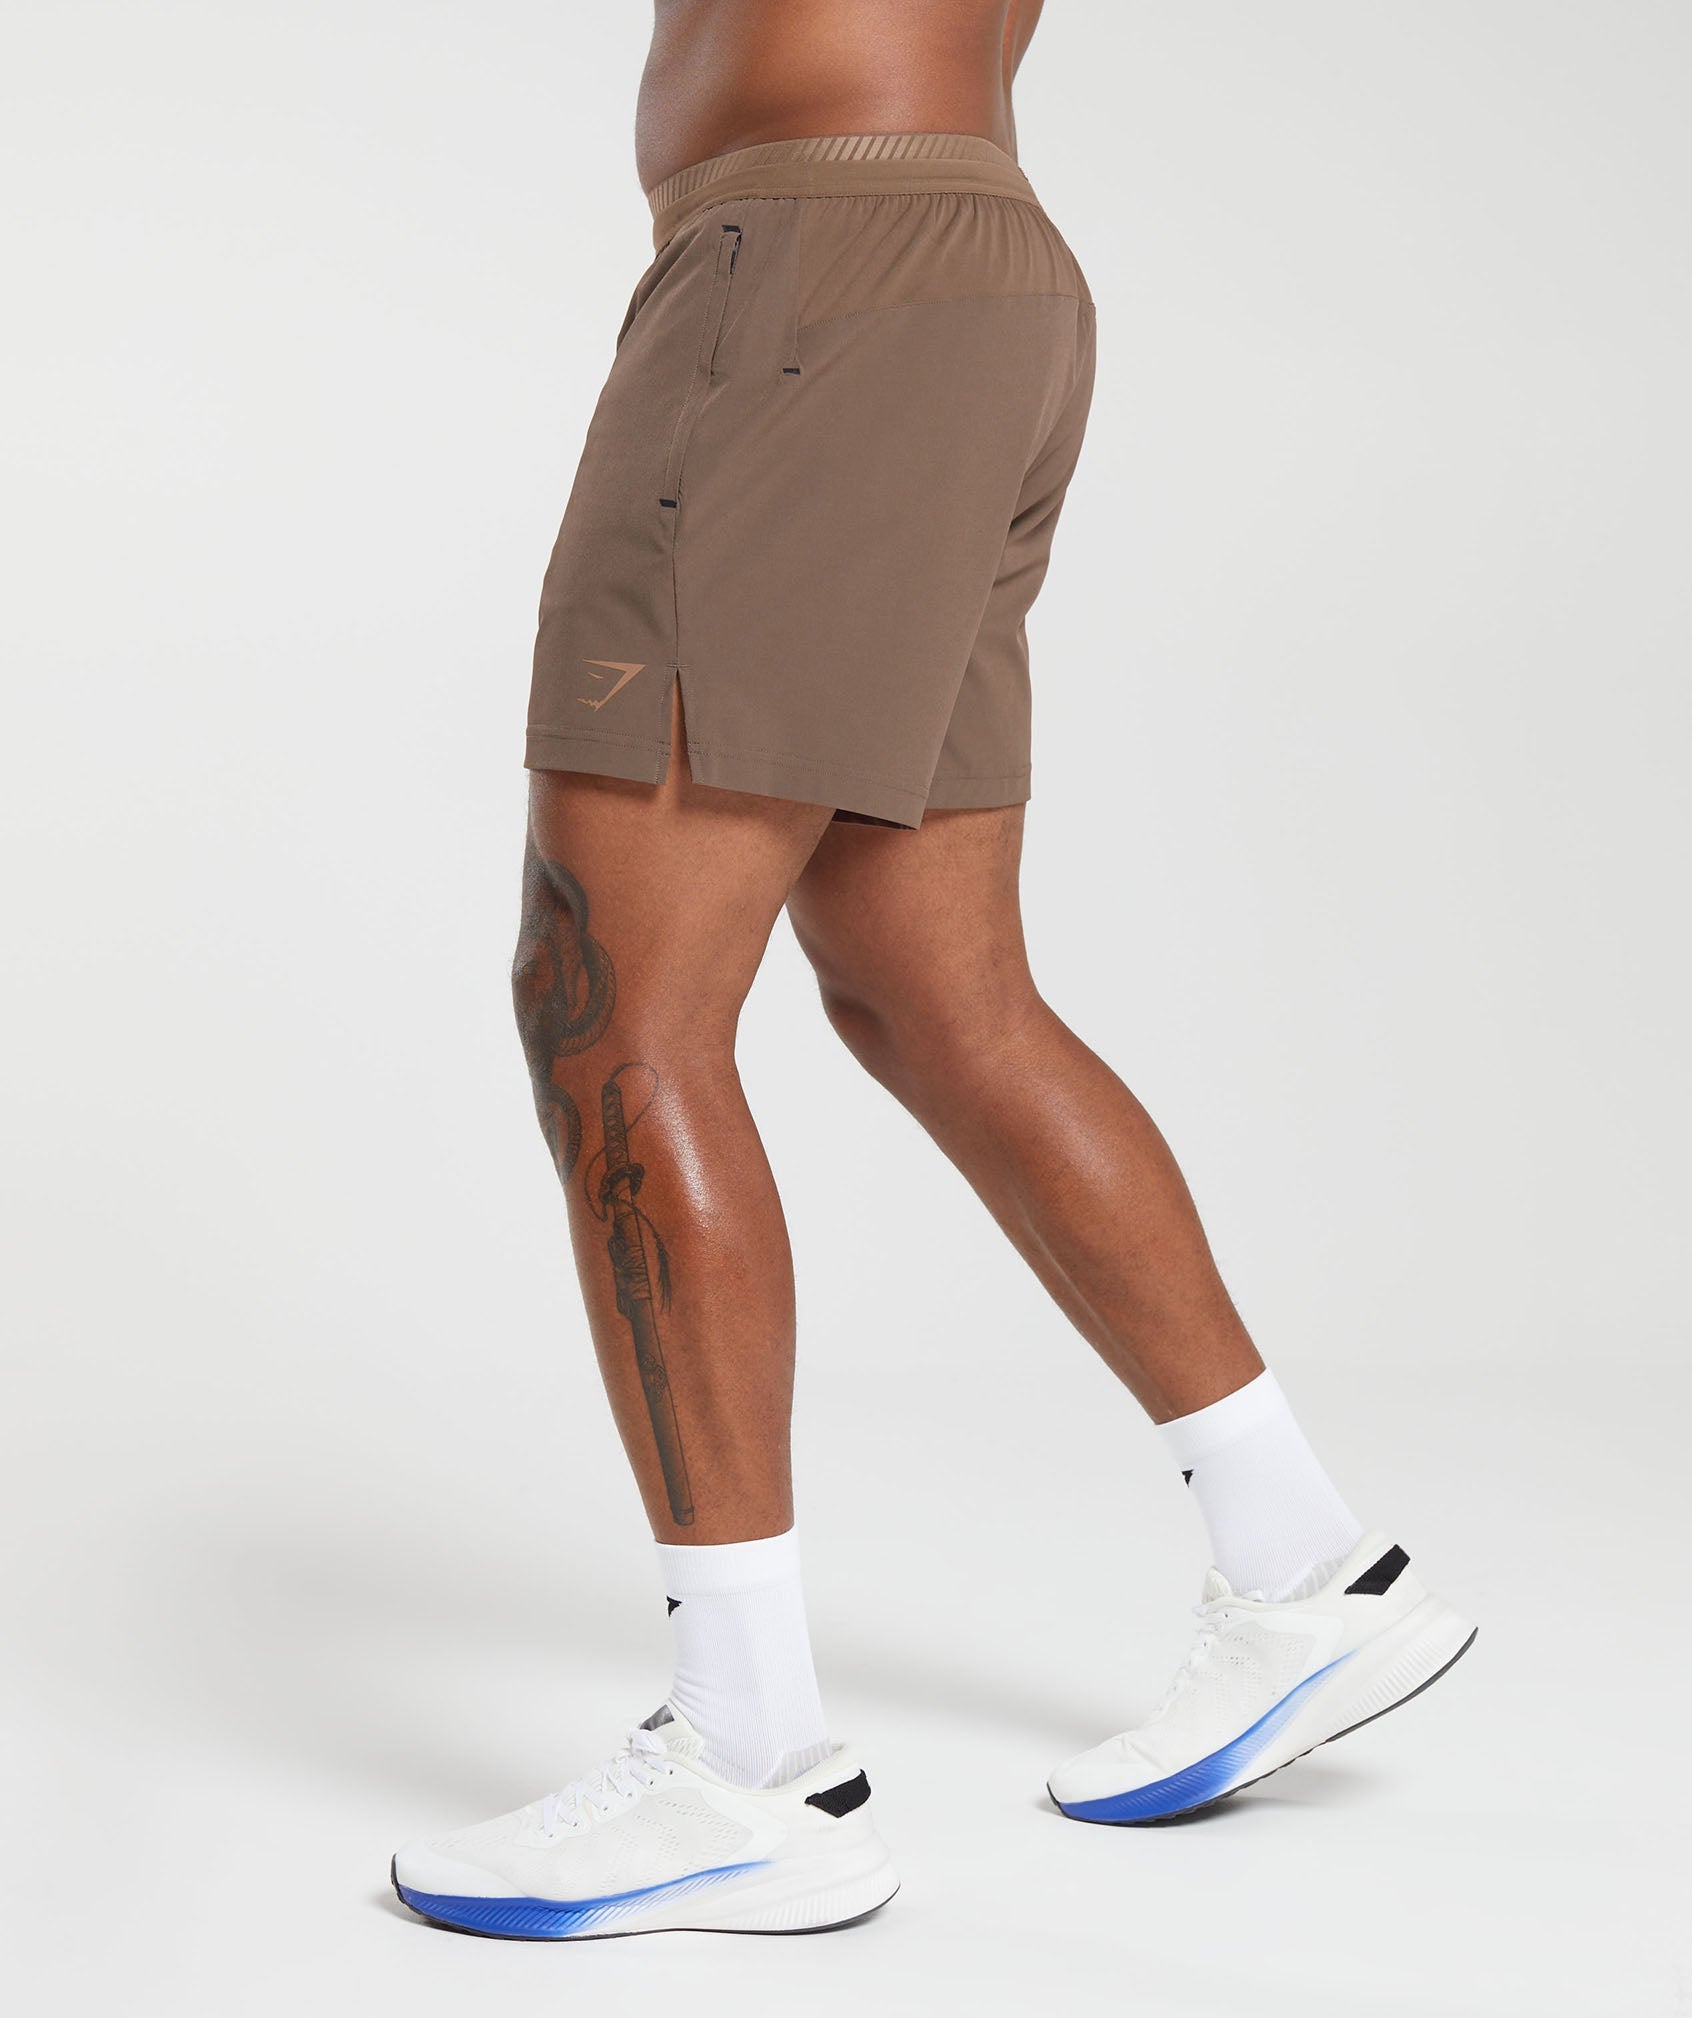 Apex 5" Hybrid Shorts in Soft Brown - view 3